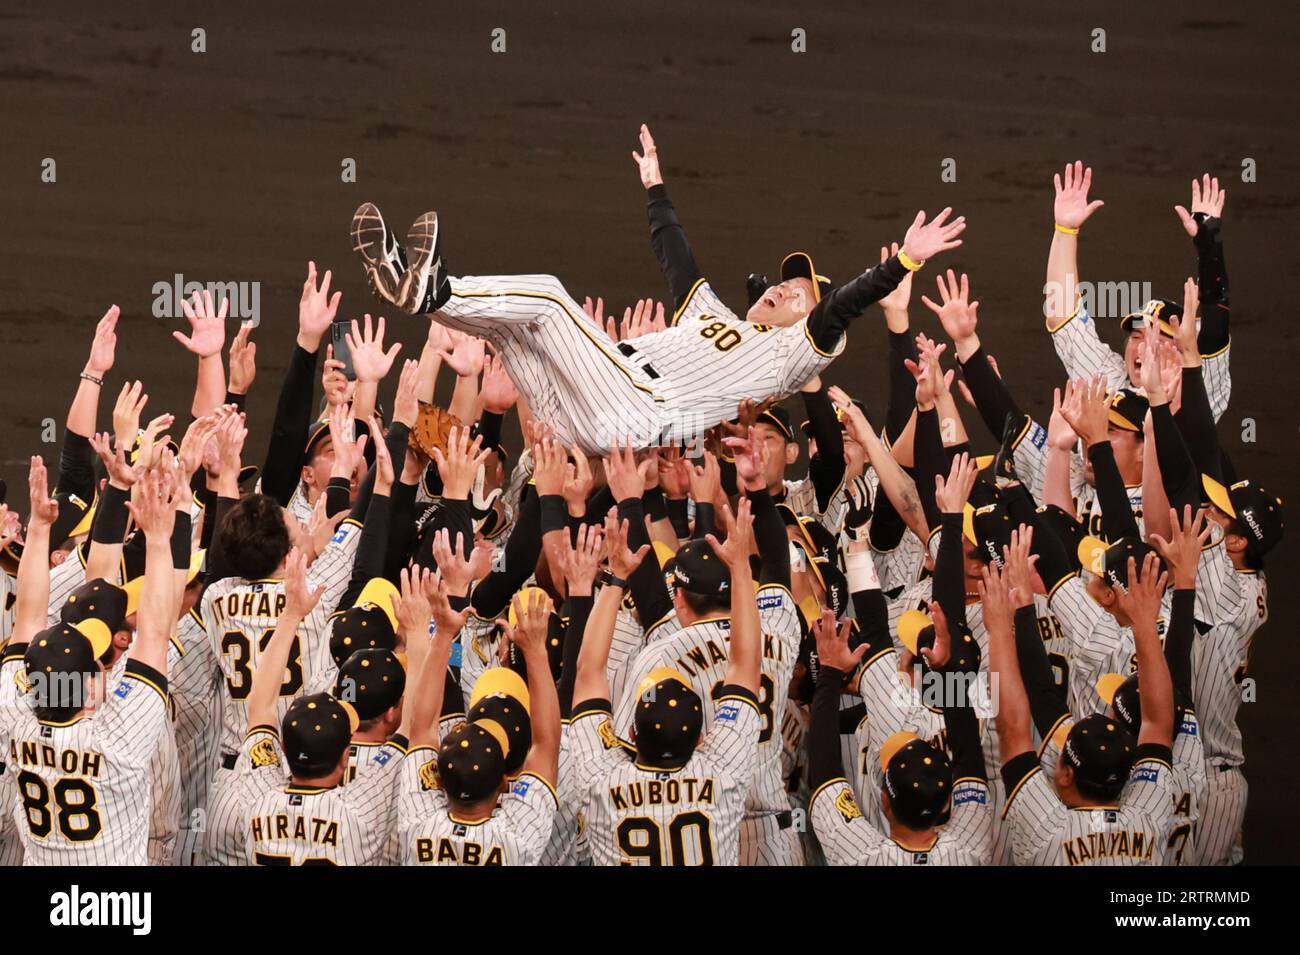 Akinobu Okada, a manager of Hanshin Tigers, is tossed in the air by members after grabbing championship of central league at Hanshin Koshien Stadium in Nishinomiya City, Hyogo Prefecture on September 14,